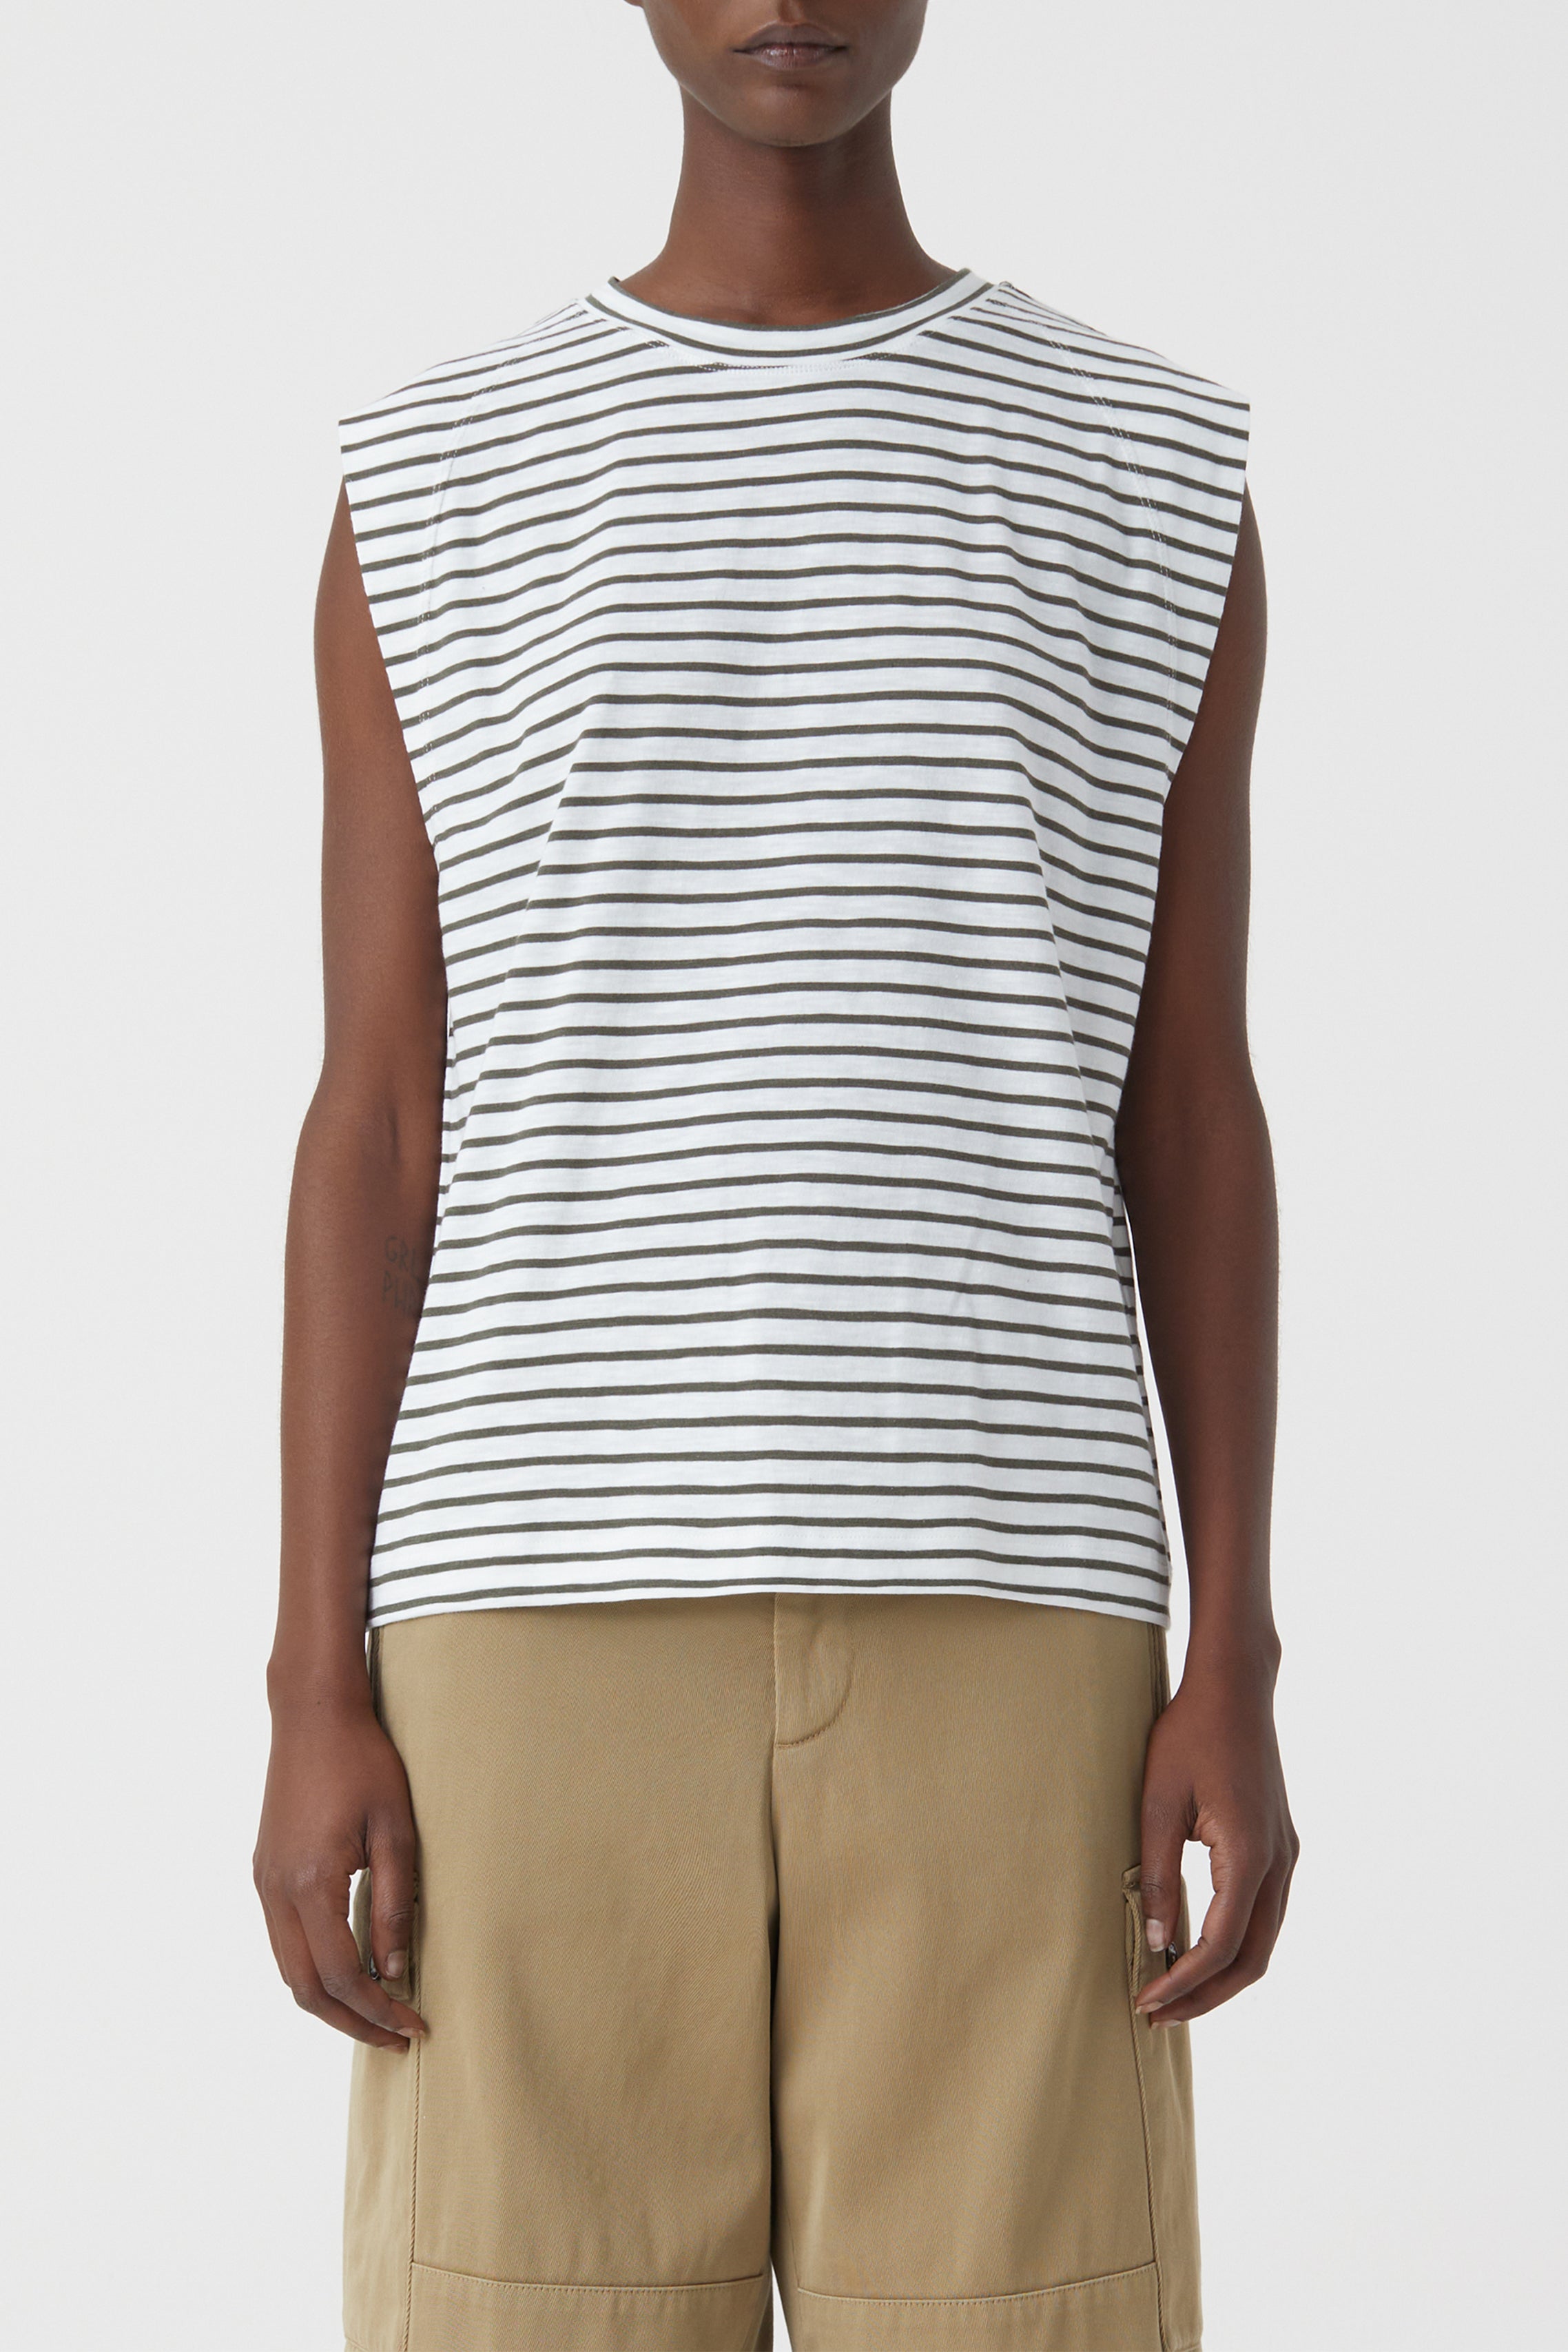 CLOSED-OUTLET-SALE-PLEATED-TANKTOP-T-SHIRTS-Strick-ARCHIVE-COLLECTION.jpg